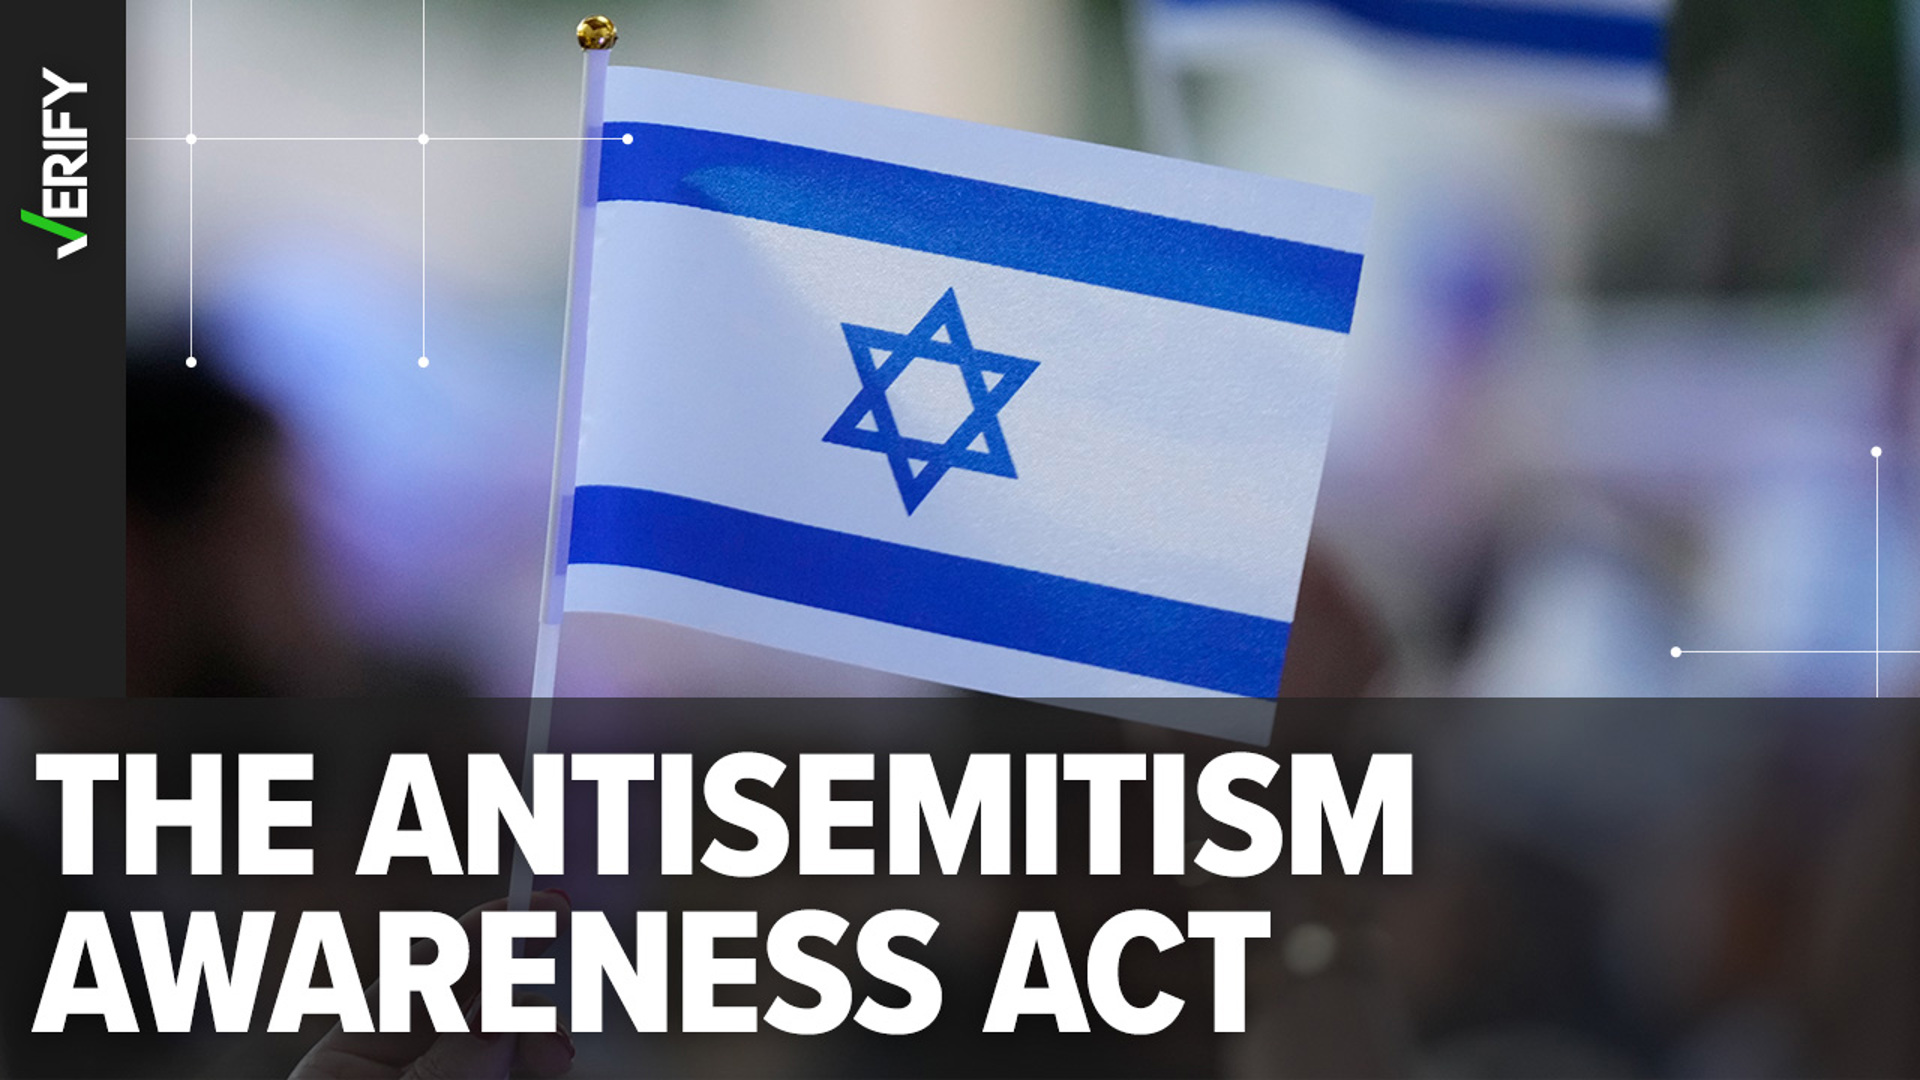 Viral social posts claim an antisemitism bill would make it illegal to criticize Israel and the Bible. Here’s what we can VERIFY about the legislation.